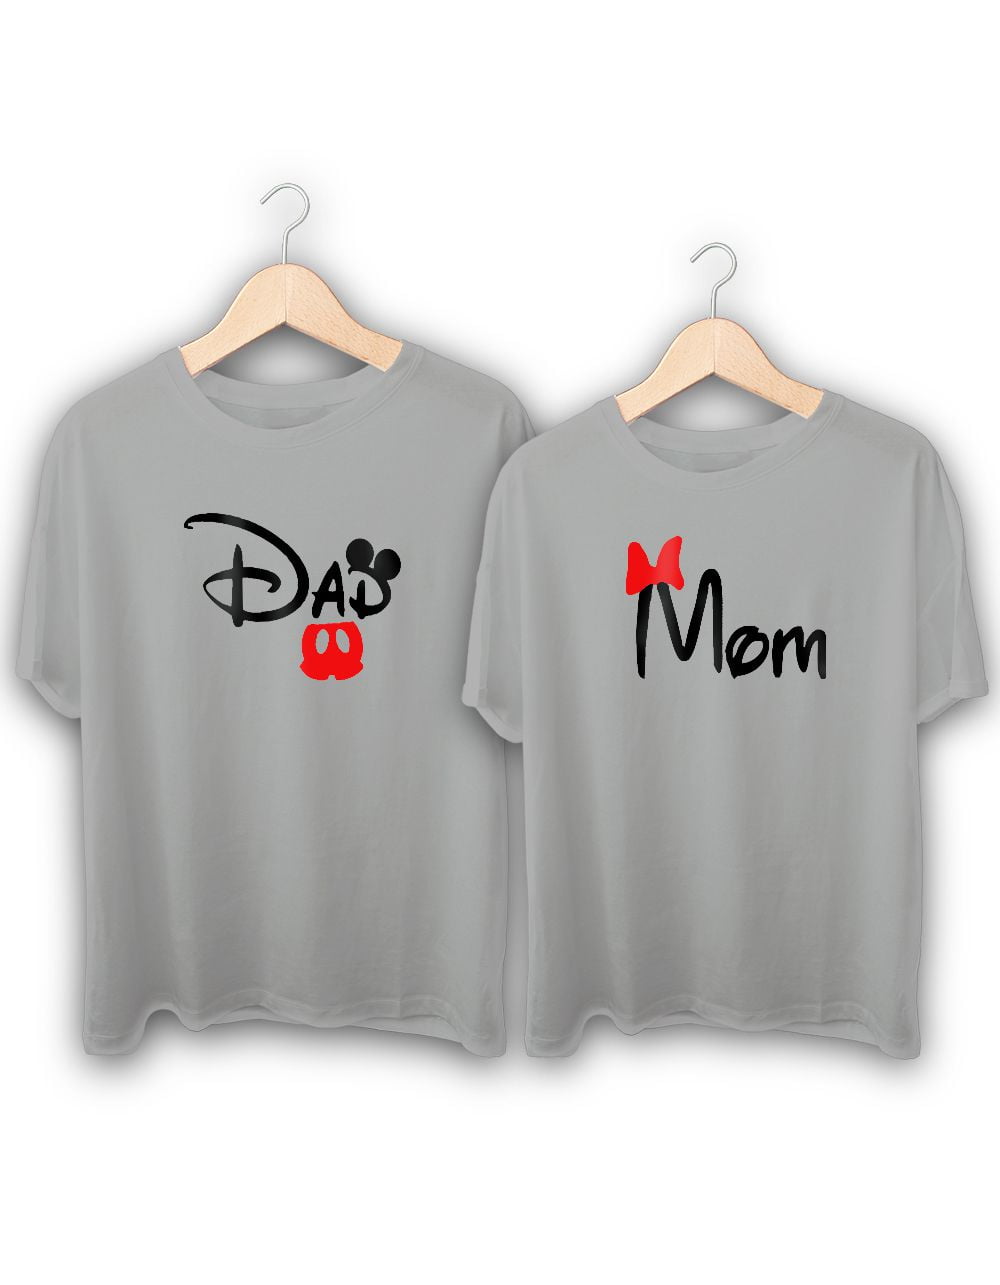 Dad and Mom Couple T-Shirts